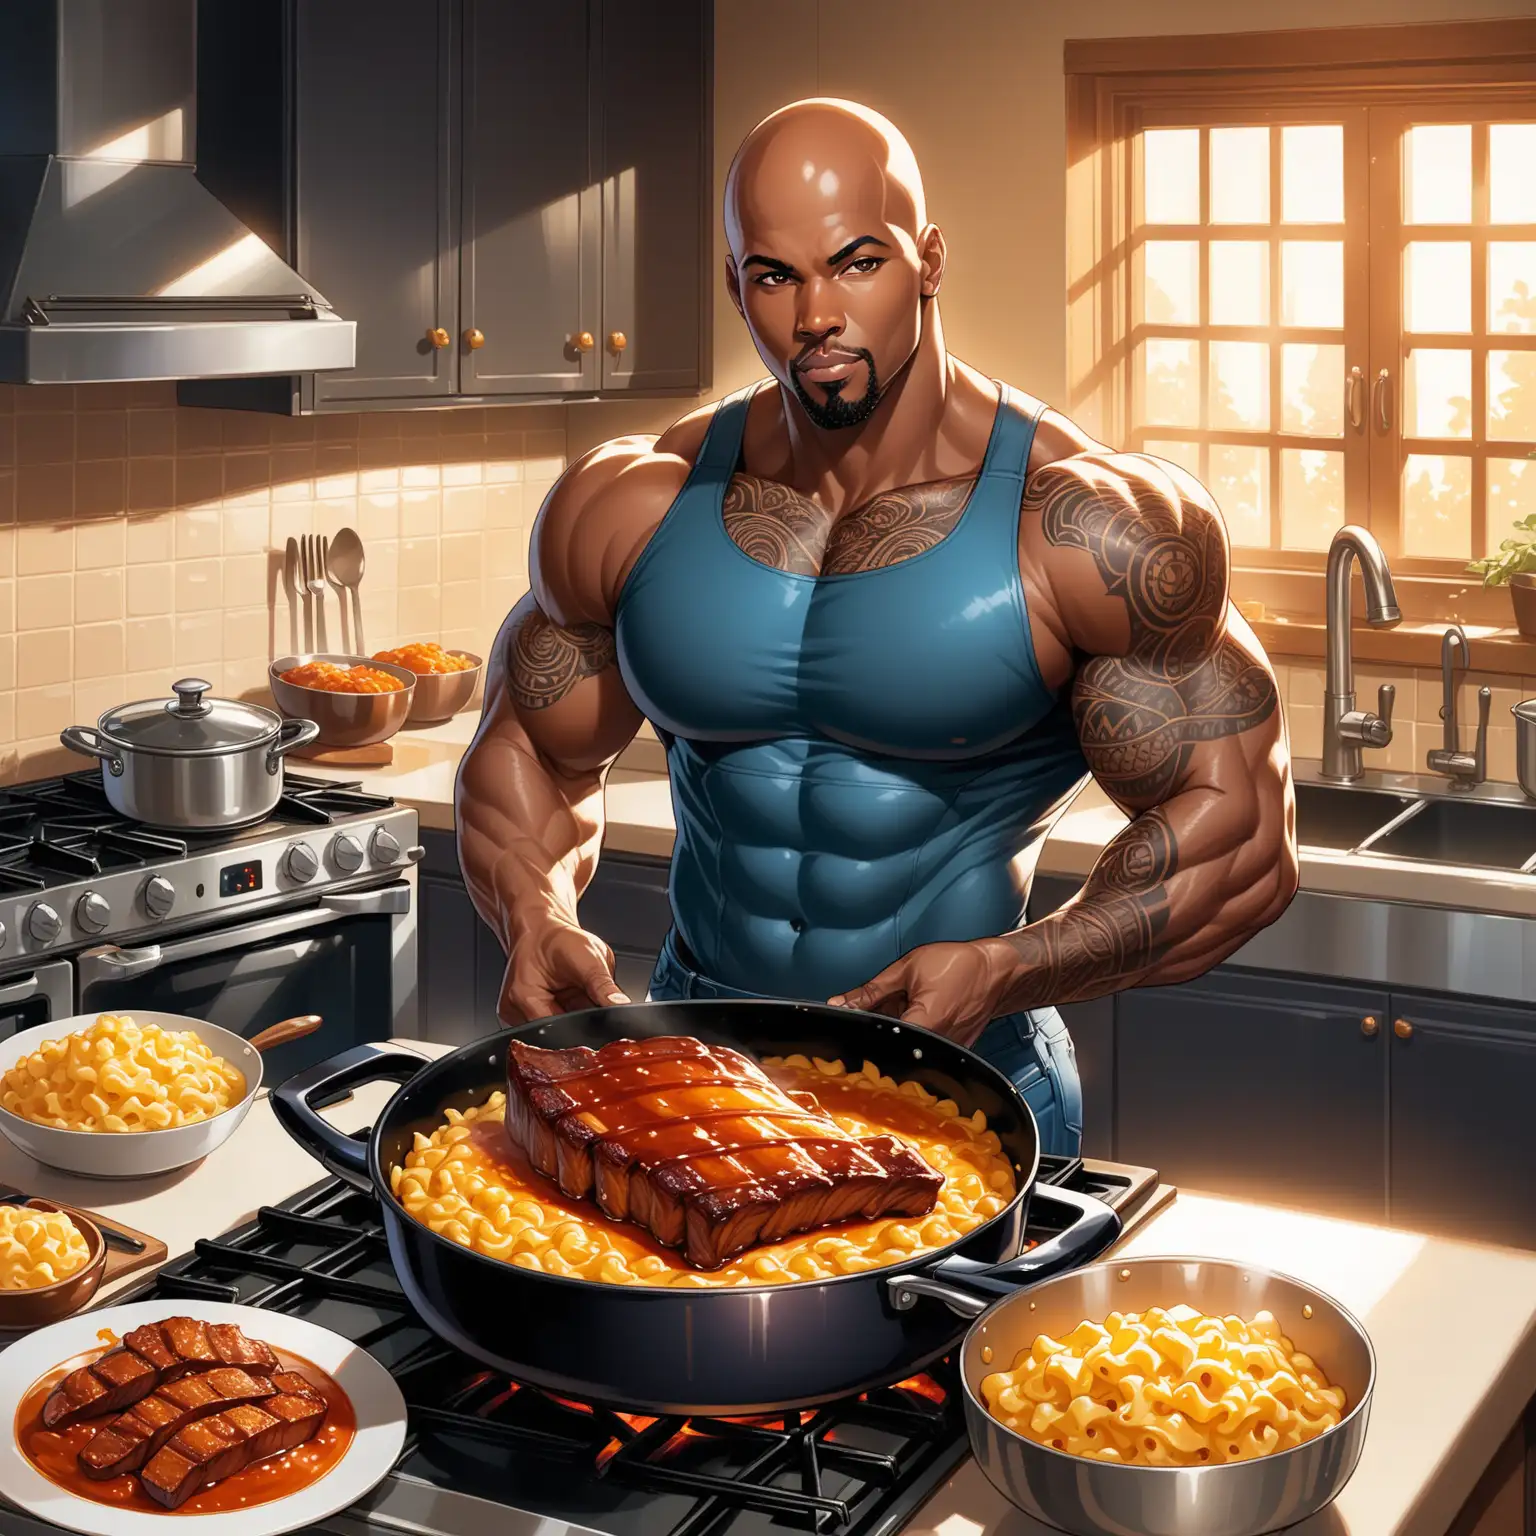 Create a cartoon African American woman with long, glossy, black-blue straight hair, wearing jeans and a crop top, standing barefoot in front of her meal on the stove in a detailed kitchen. She proudly looks at the viewer, with a delicious meal on the stove beside her. The African American man wears jeans, crop top, visible tattoos on this big strong arms, bald head, house shoes, he is eating a rib from the stove. The meal includes glazed ribs with a shiny, caramelized sauce, roasted cubed sweet potatoes with a crispy exterior, and a pan with creamy, baked macaroni and cheese with a gooey, stringy texture. The kitchen should have a warm, cozy ambiance with soft lighting that highlights the shiny metallic surfaces, especially the stove, enhancing the realism of the textures and colors of the food. Aim for photorealism in the portrayal of light, shadows, and textures to make the scene as lifelike as possible